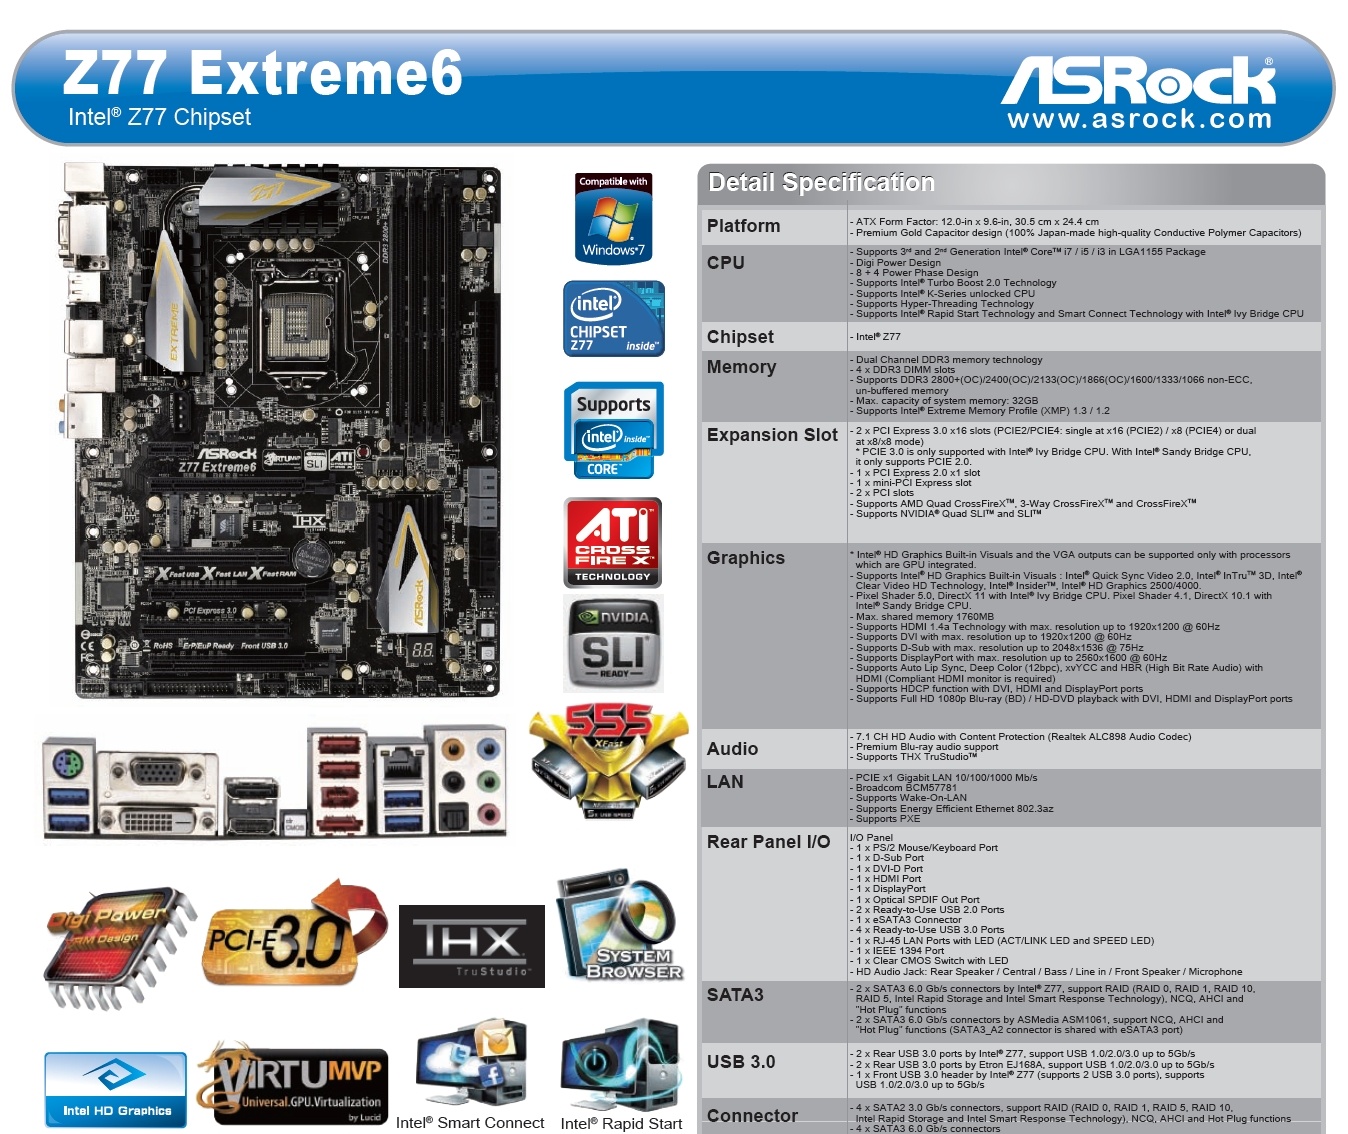 Behold the Extreme6 Motherboard for Bridge